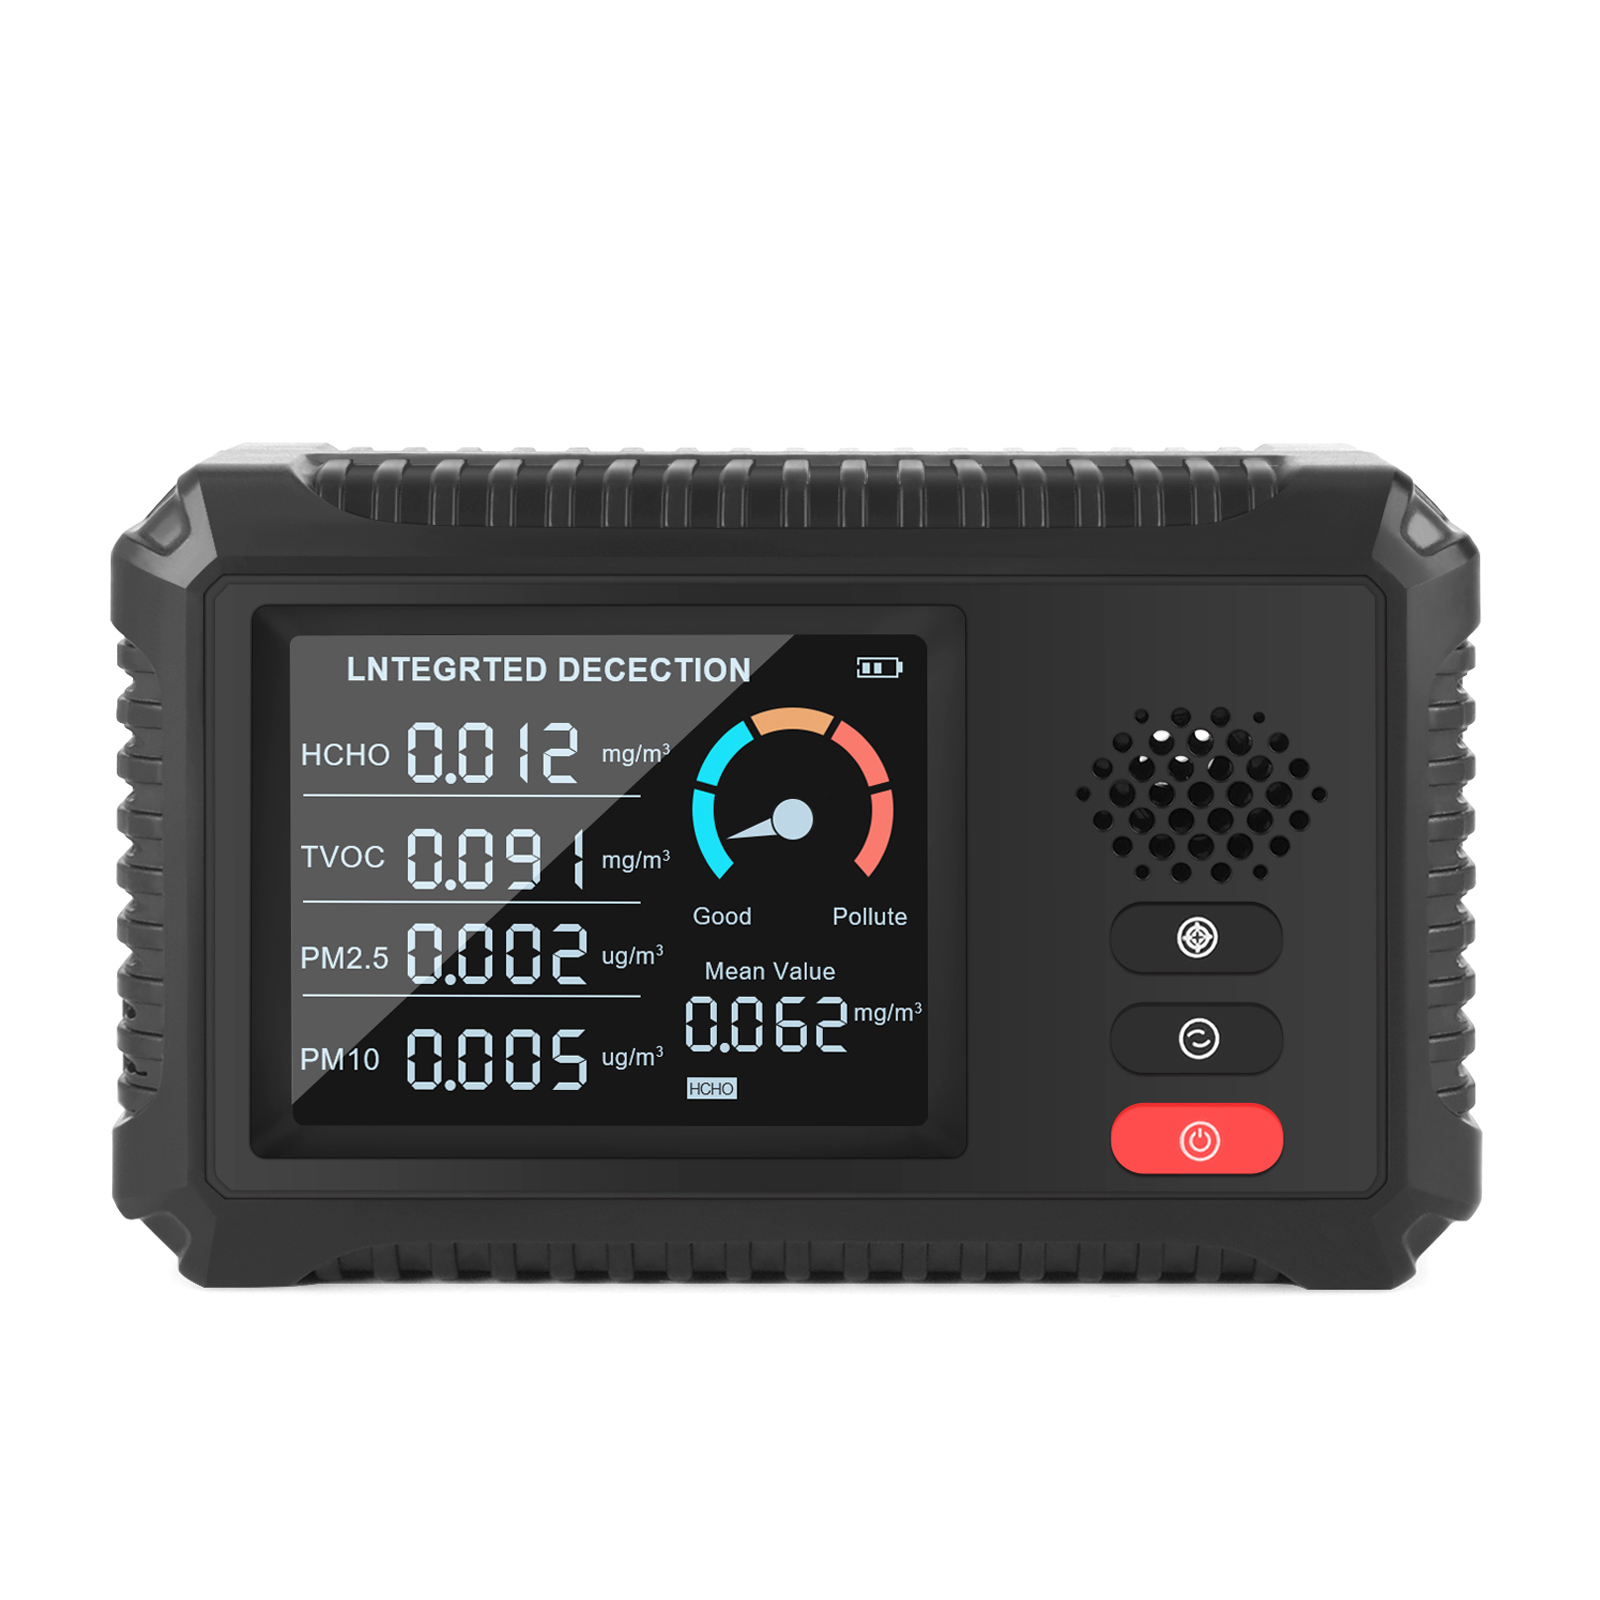 HLW-100 5-in-1 Air Quality Monitor CO2 HCHO TVOC PM2.5 PM10 Air Gas Detector